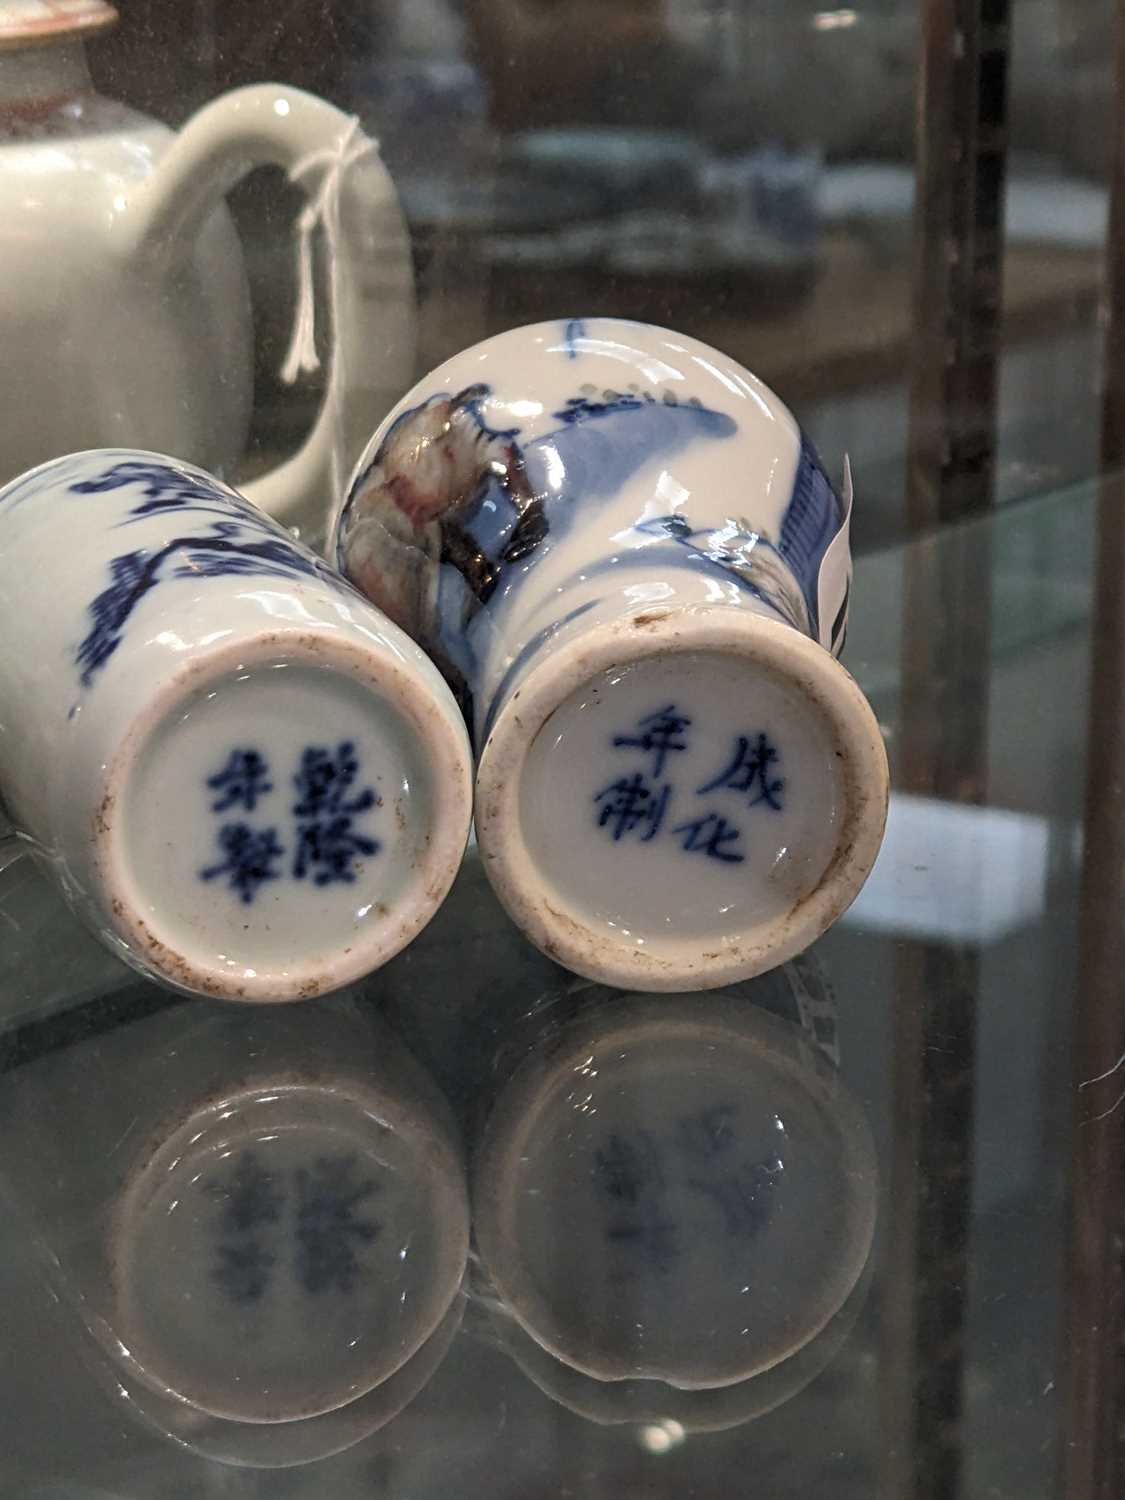 TWO CHINESE PORCELAIN SNUFF BOTTLES, including baluster copper red and blue and white bottle painted - Image 6 of 6